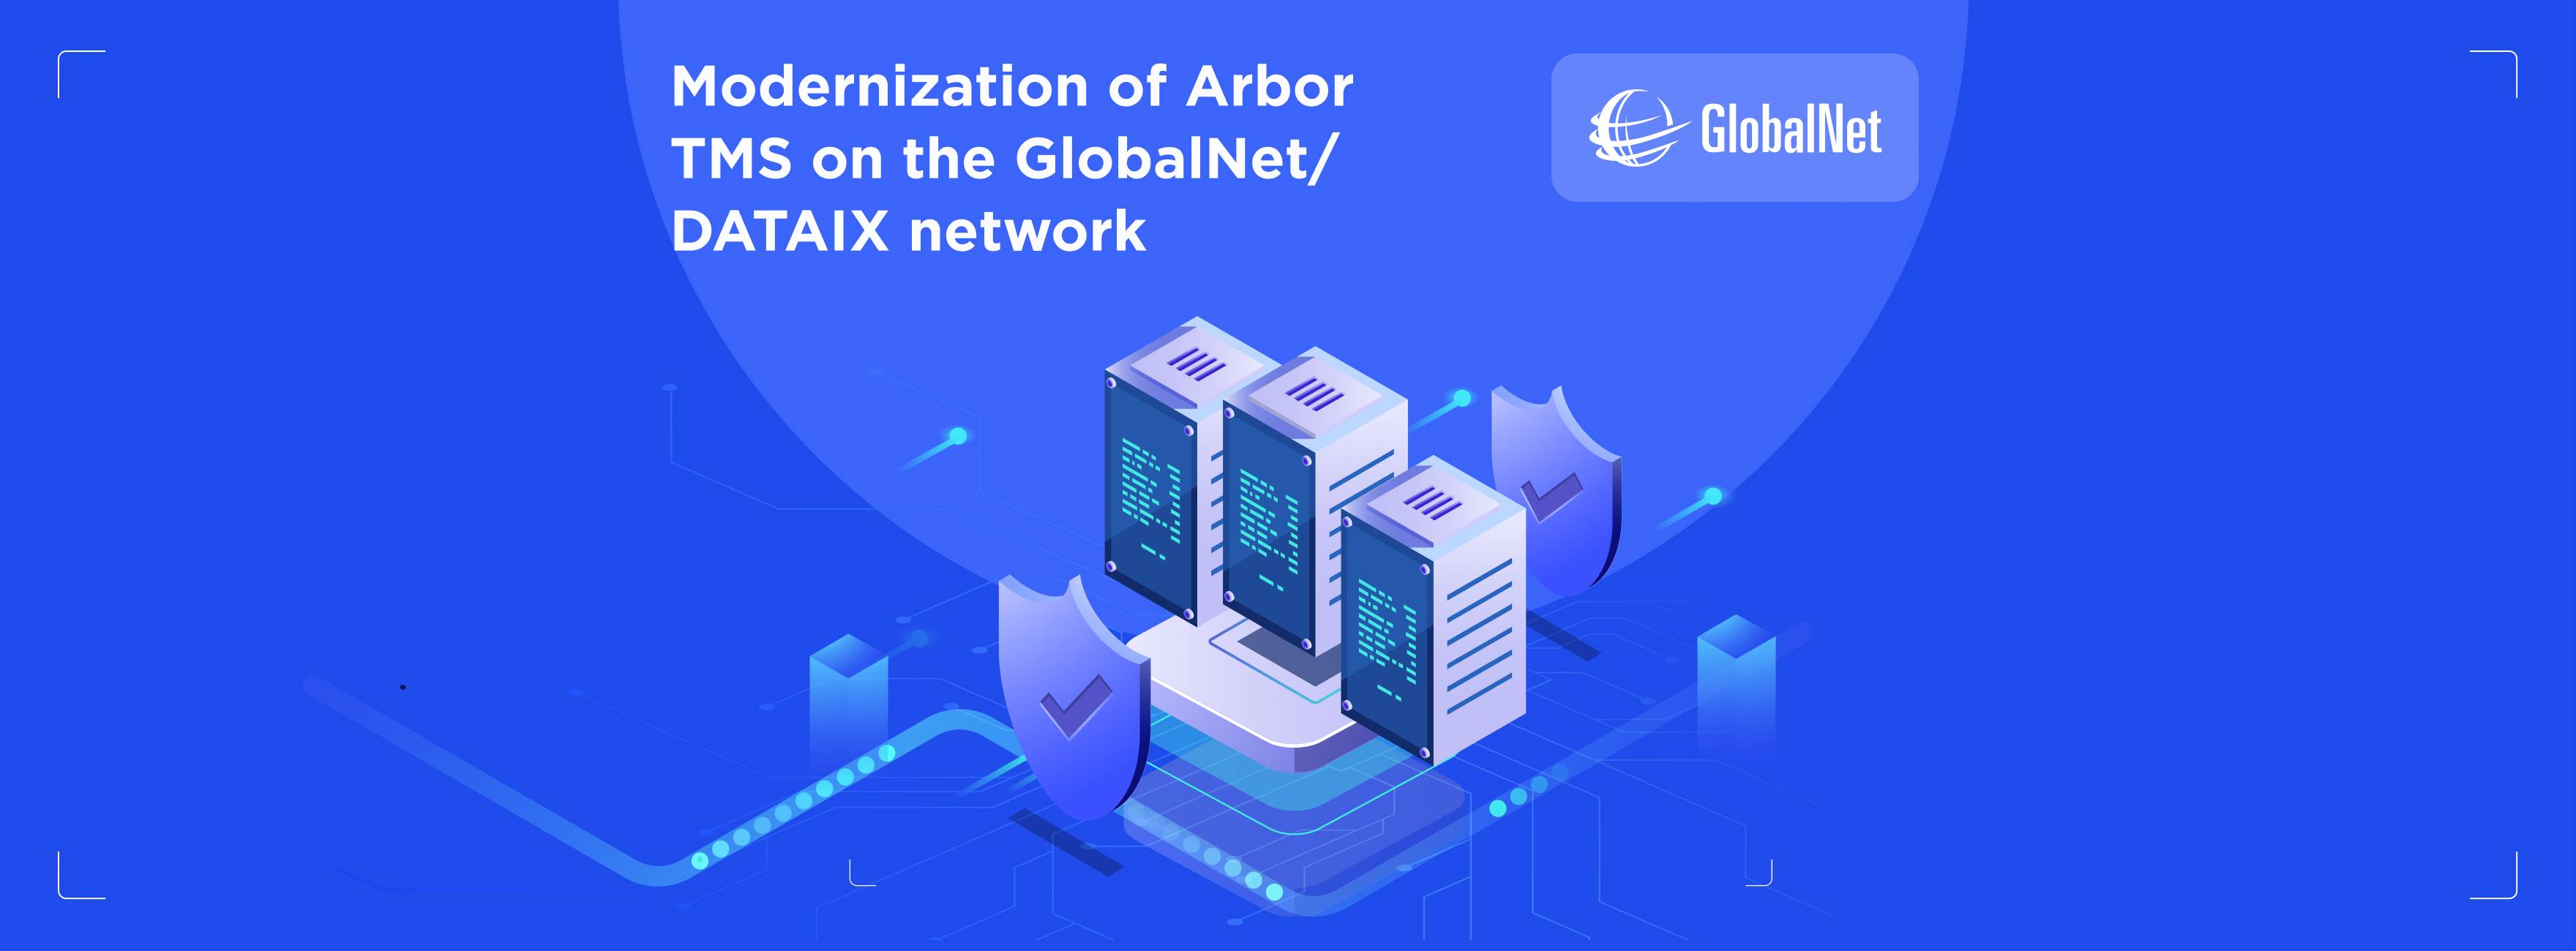 The new capabilities of Arbor TMS within GlobalNet and its DATAIX network